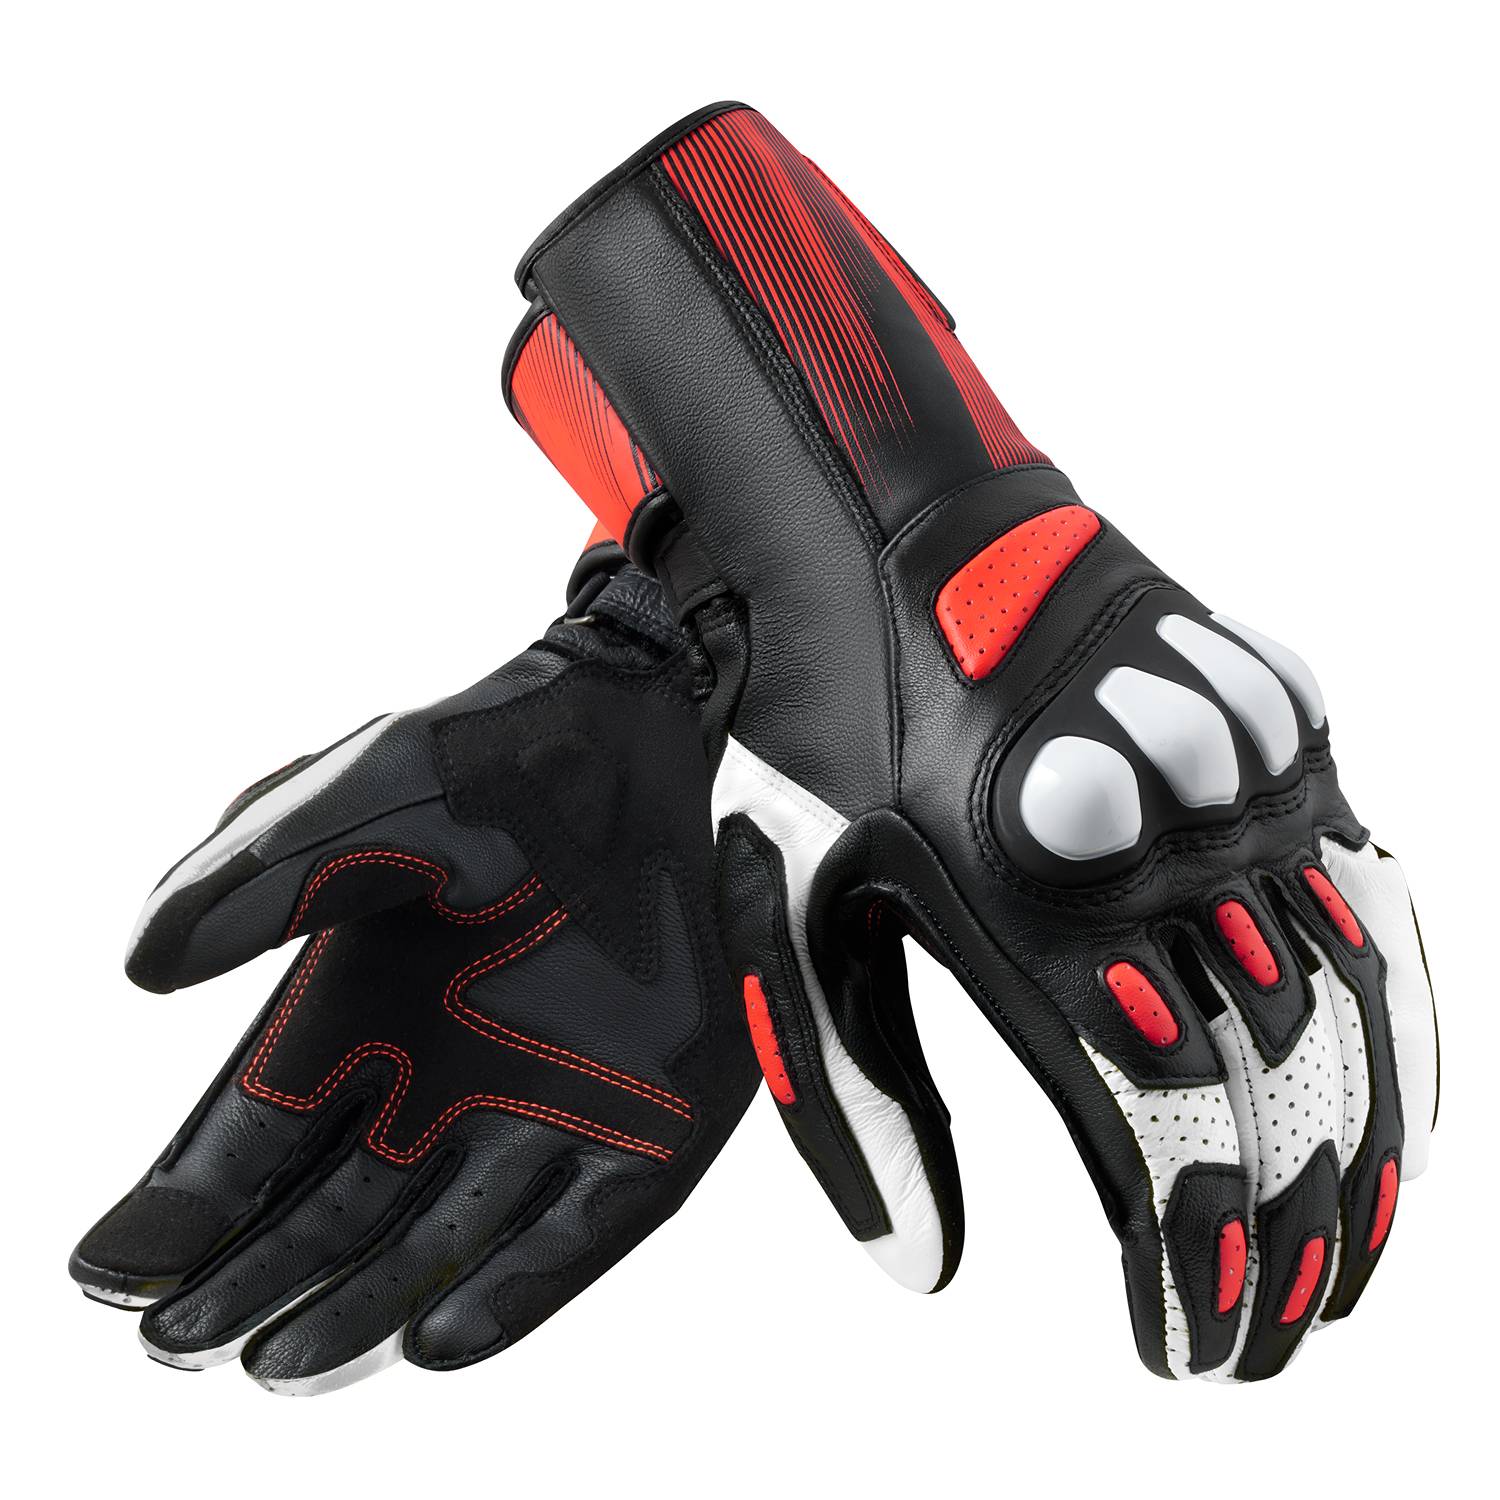 Image of REV'IT! Metis 2 Gloves Black Neon Red Size 3XL ID 8700001360470